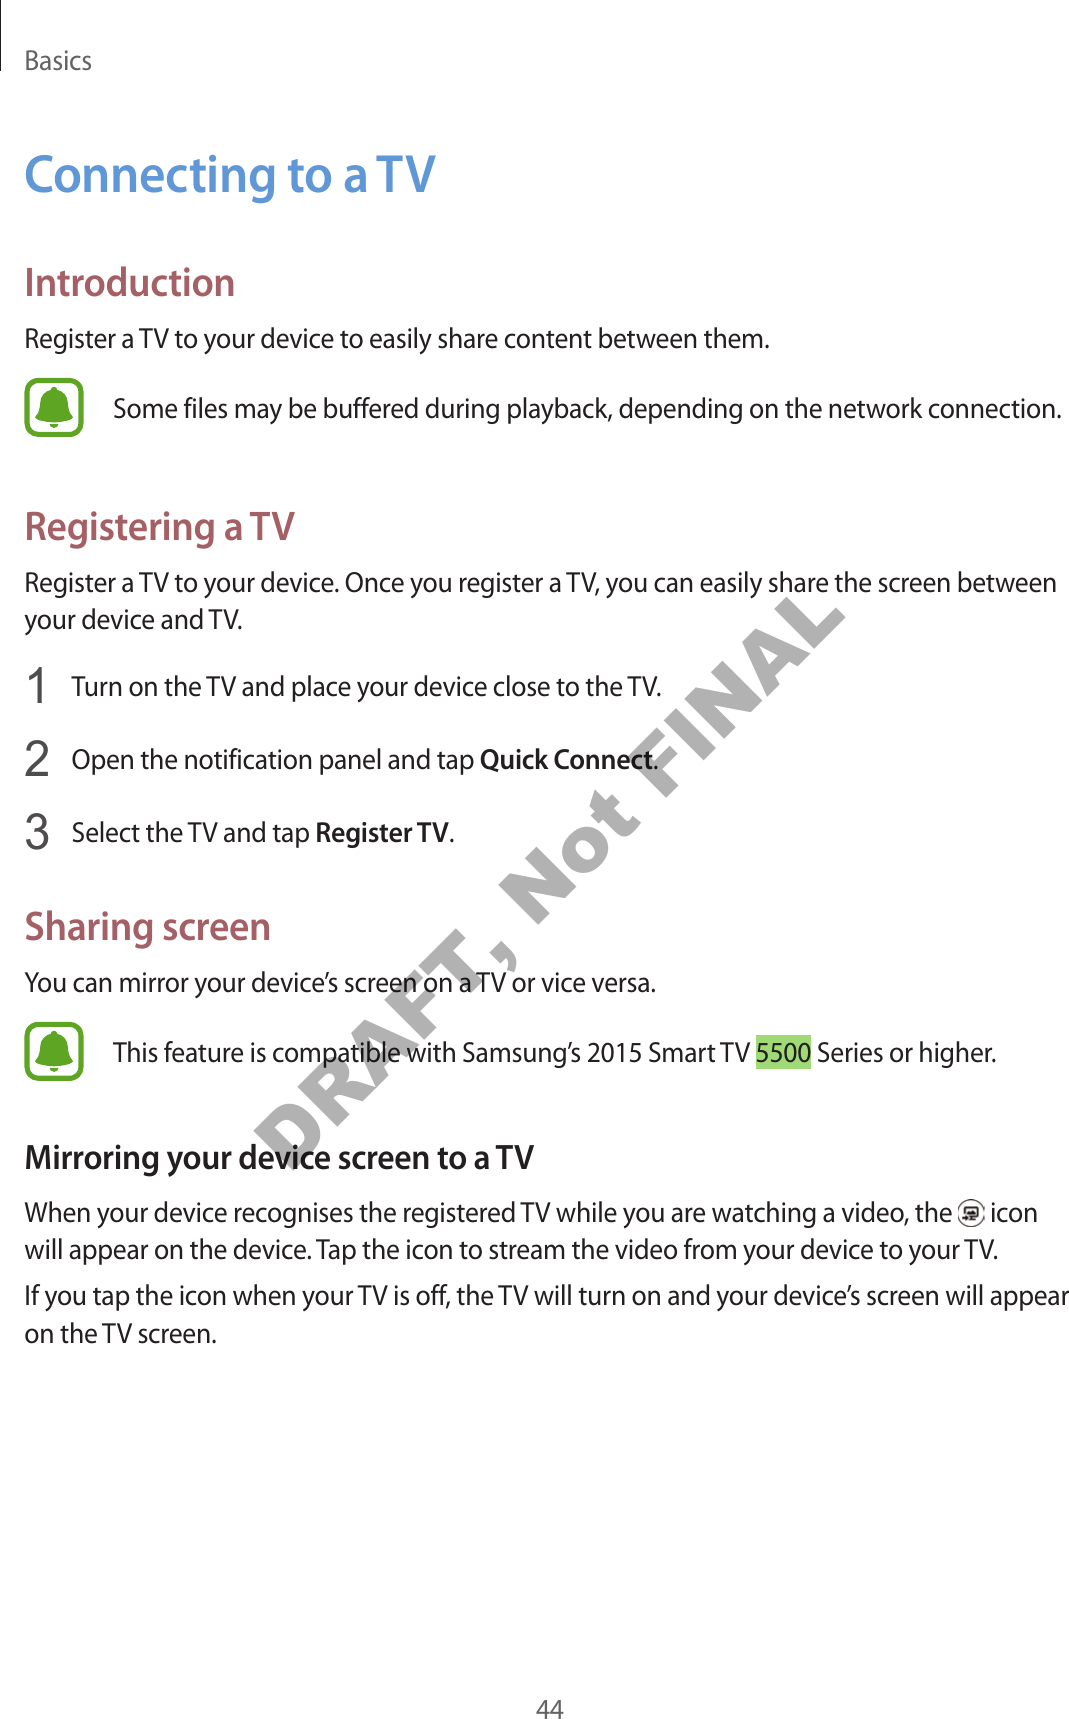 Basics44Connecting to a TVIntroductionRegister a TV to your device to easily share content between them.Some files may be buffered during playback, depending on the network connection.Registering a TVRegister a TV to your device. Once you register a TV, you can easily share the screen between your device and TV.1  Turn on the TV and place your device close to the TV.2  Open the notification panel and tap Quick Connect.3  Select the TV and tap Register TV.Sharing screenYou can mirror your device’s screen on a TV or vice versa.This feature is compatible with Samsung’s 2015 Smart TV 5500 Series or higher.Mirroring your device screen to a TVWhen your device recognises the registered TV while you are watching a video, the   icon will appear on the device. Tap the icon to stream the video from your device to your TV.If you tap the icon when your TV is off, the TV will turn on and your device’s screen will appear on the TV screen.DRAFT, Not FINAL